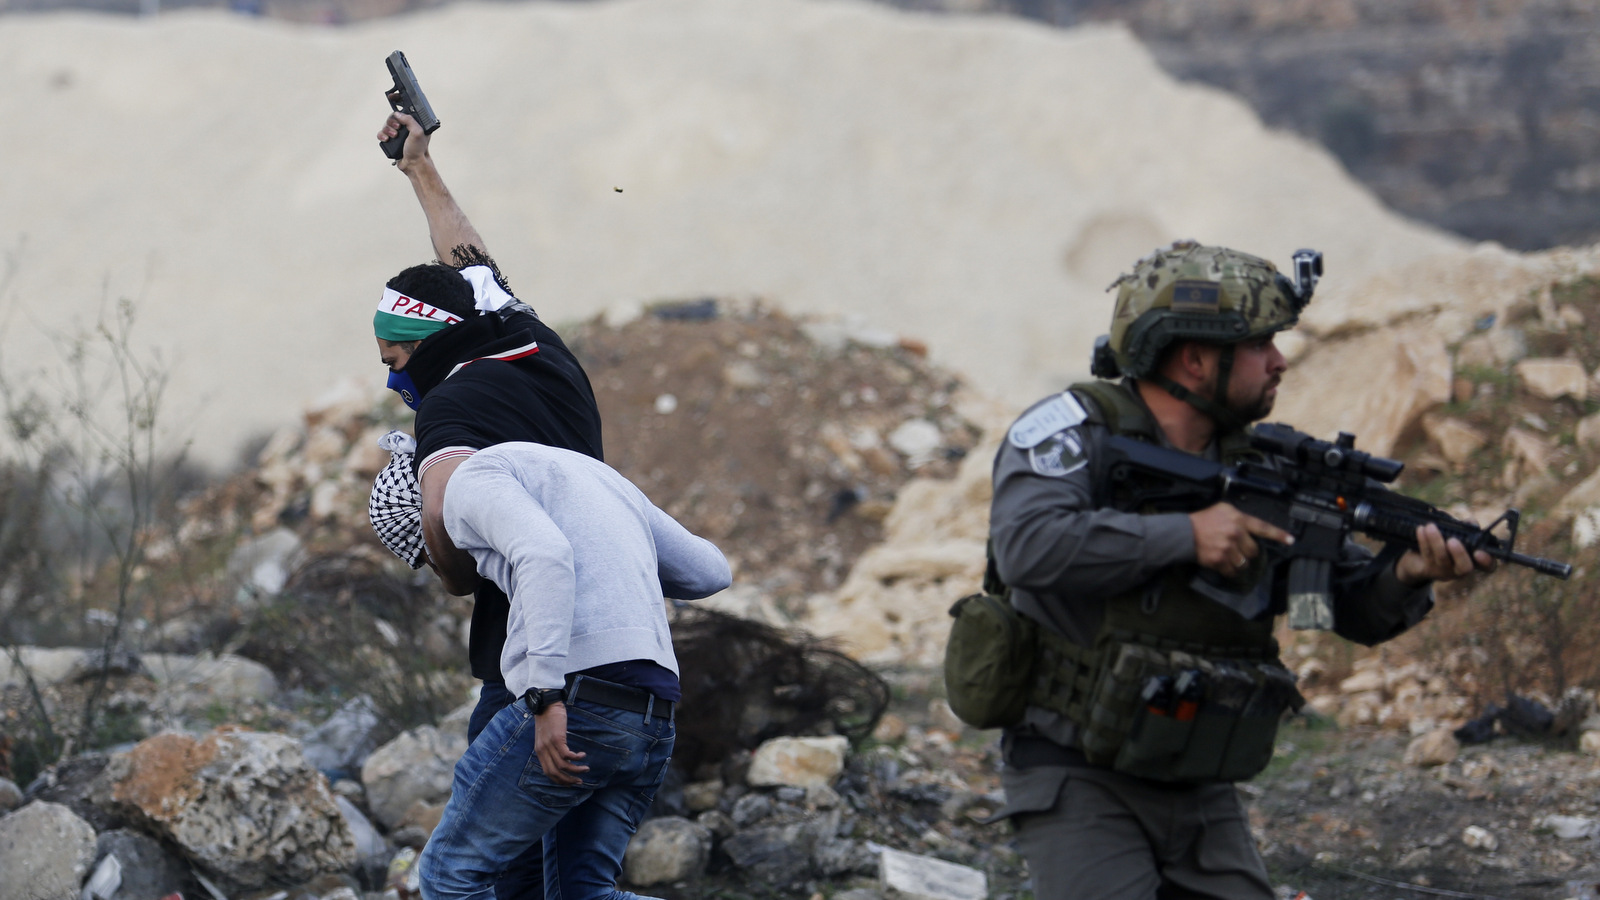 An Israeli policeman disguised as a Palestinian protester raises a pistol in air as he arrests a Palestinian demonstrator during protests against U.S. President Donald Trump's decision to recognize Jerusalem as the capital of Israel, in the West Bank city of Ramallah, Dec. 13, 2017. (AP/Nasser Shiyoukhi)